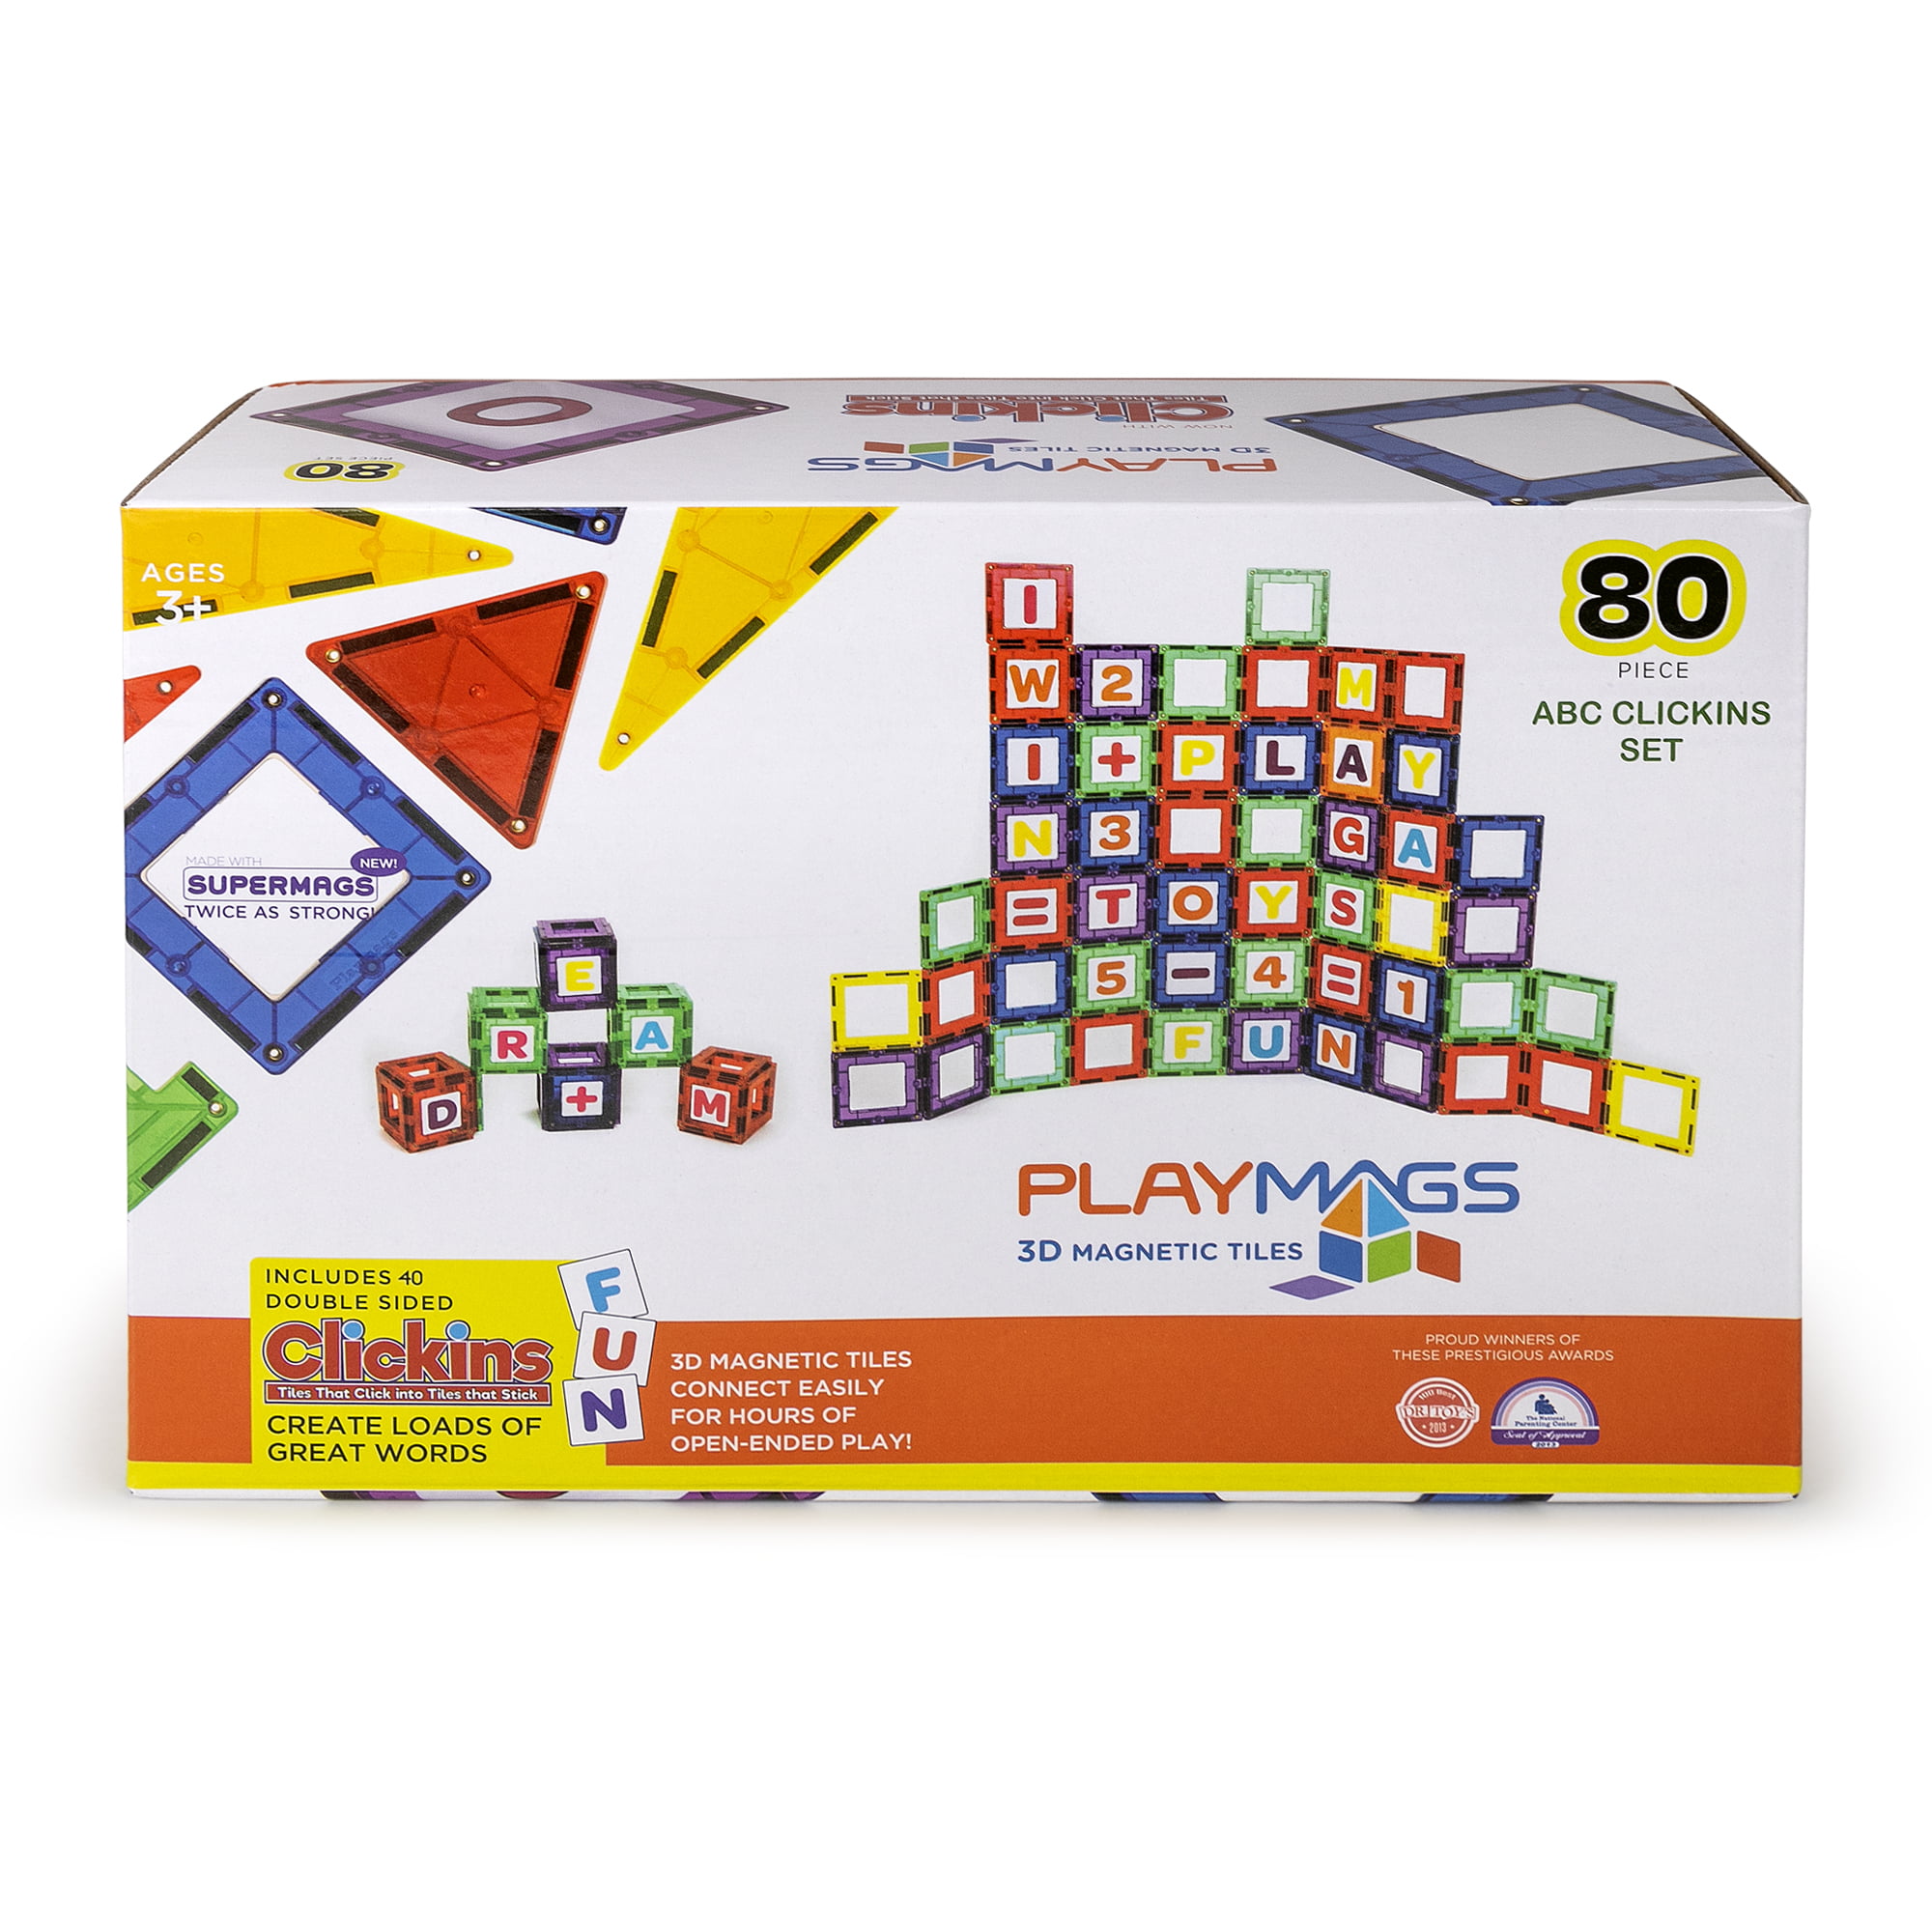 Playmags Magnetic Tile Building Set: Exclusive Educational Clickins –  80-Pc. Kit: 40 Super Strong Clear Color Magnet Tiles Windows & 40 Letters &  Numbers – Stimulate Creativity & Brain Development 